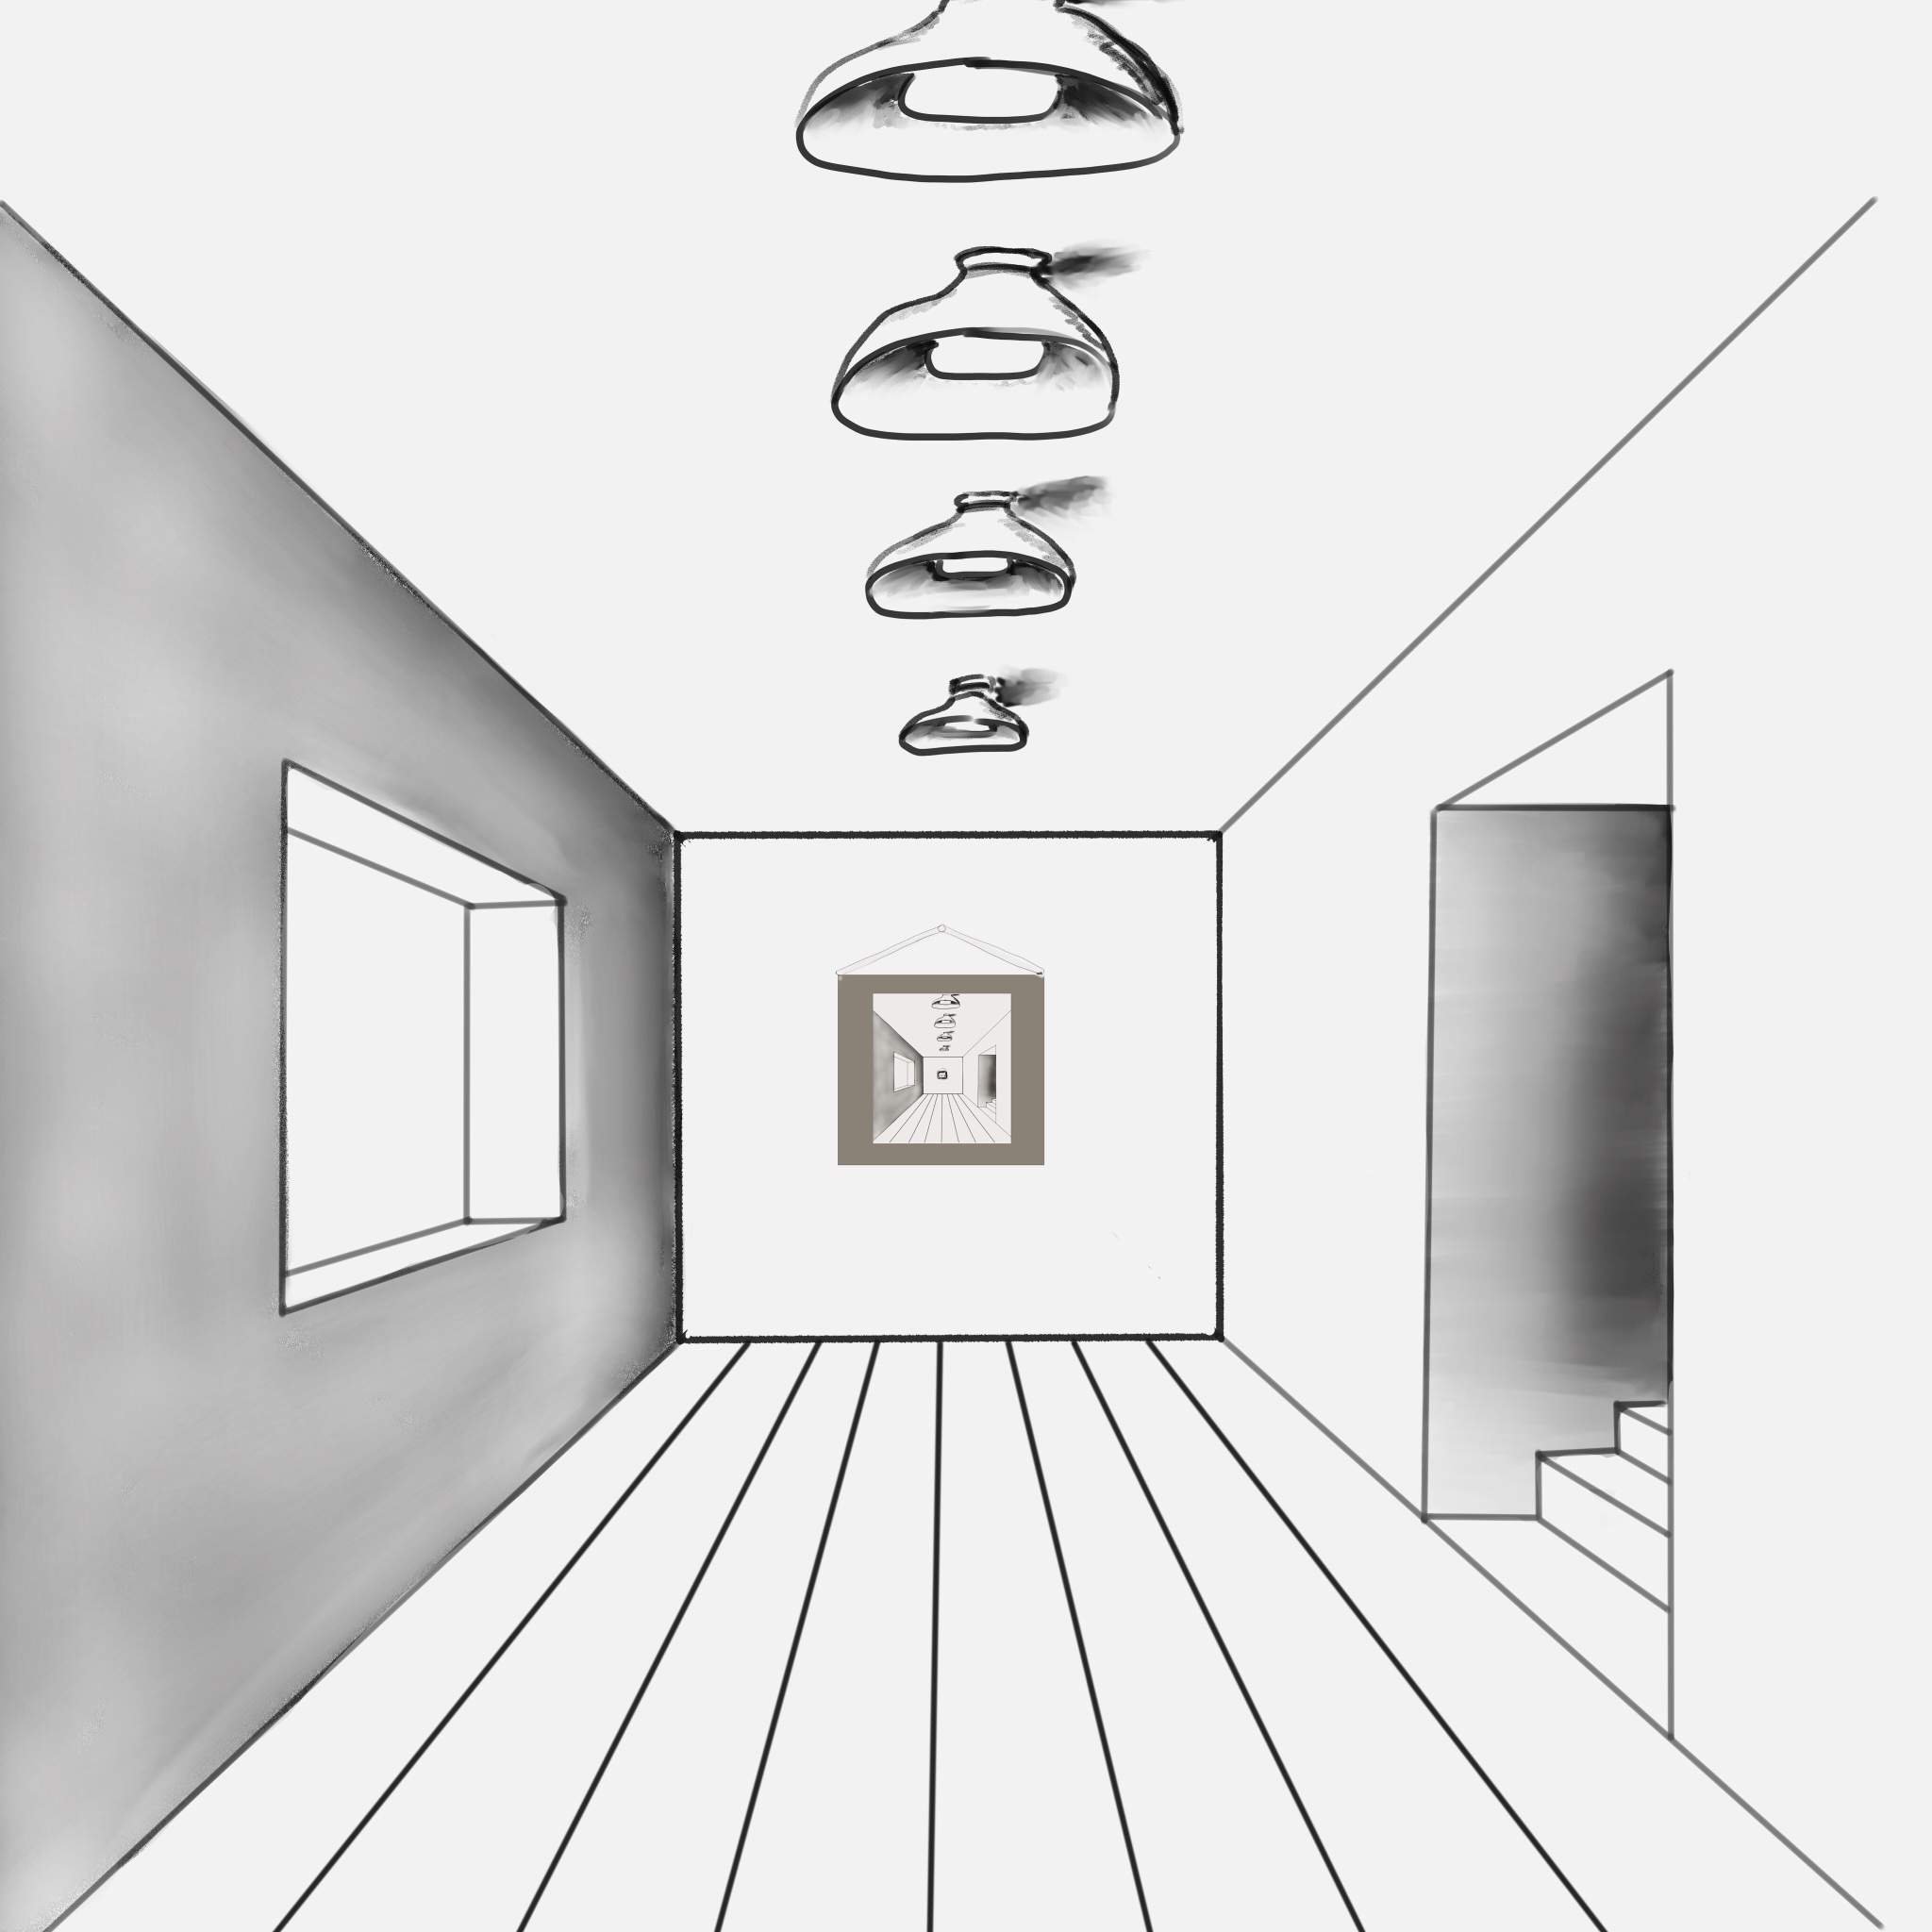 How to Draw a Room in 2 Point Perspective: Step by Step - YouTube